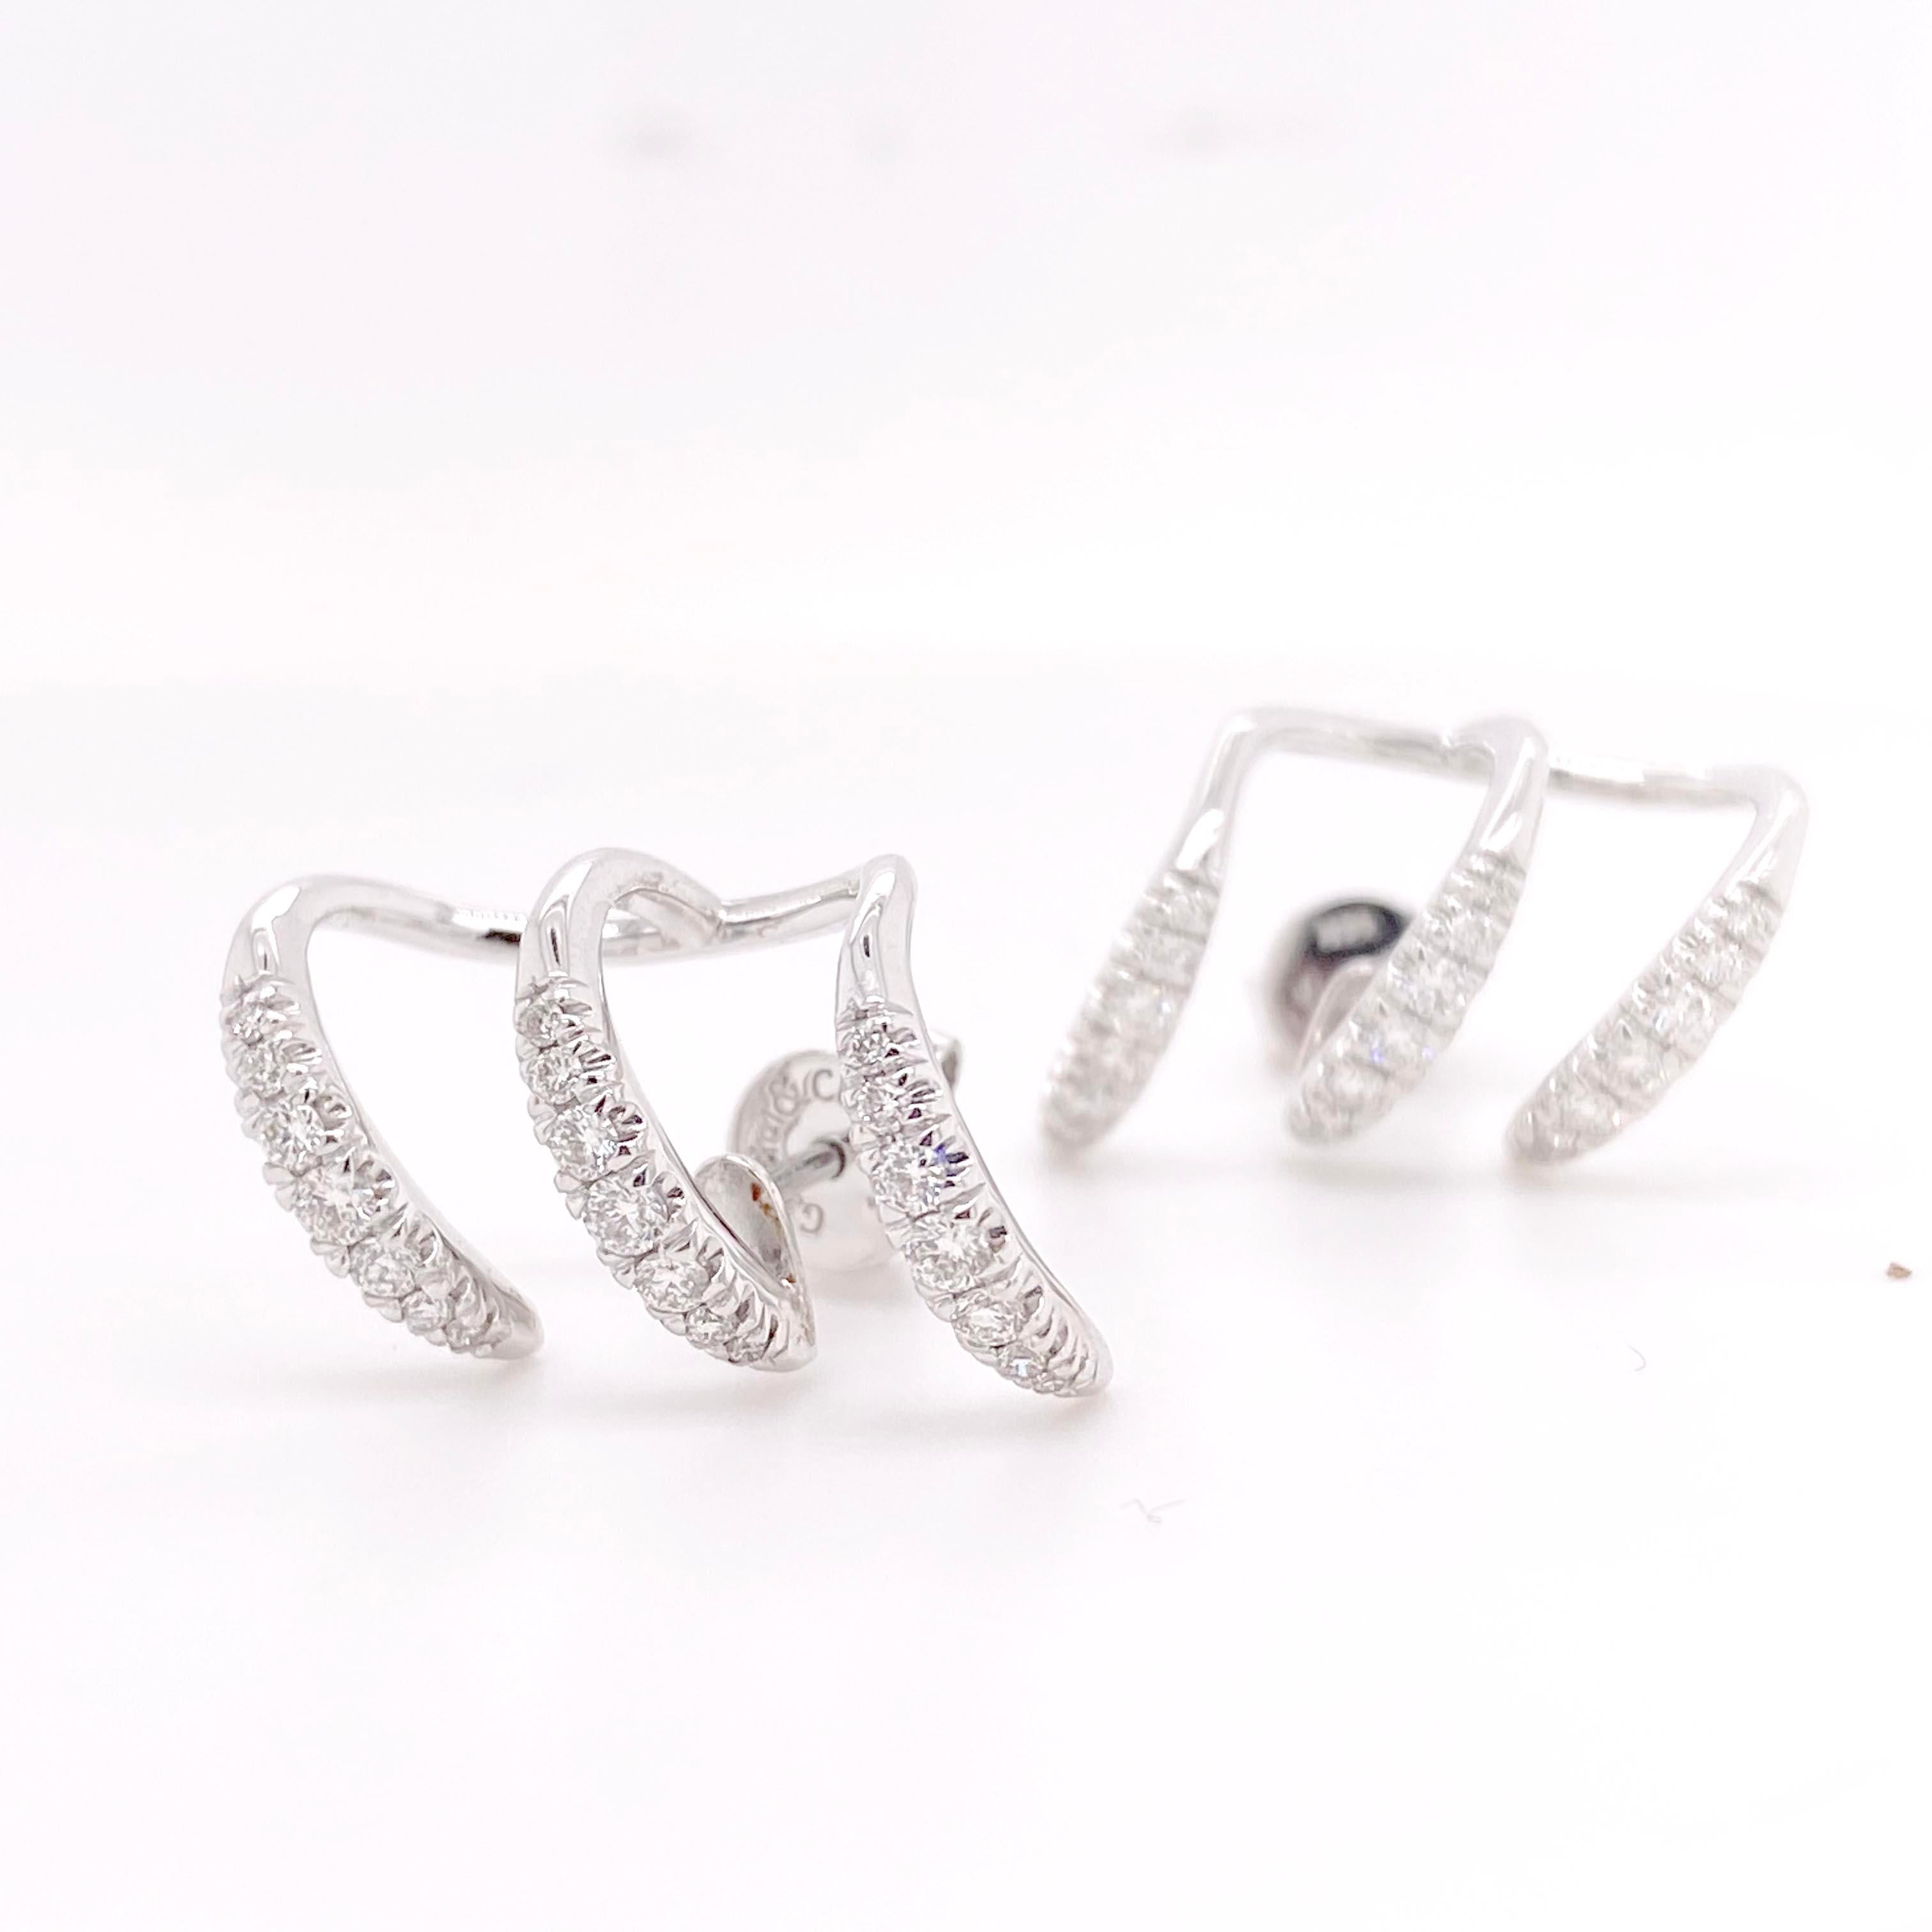 Unique diamond earrings with bright white, sparkly natural diamonds! These earrings have a fun and dynamic design that gives you a custom multi-piercing 